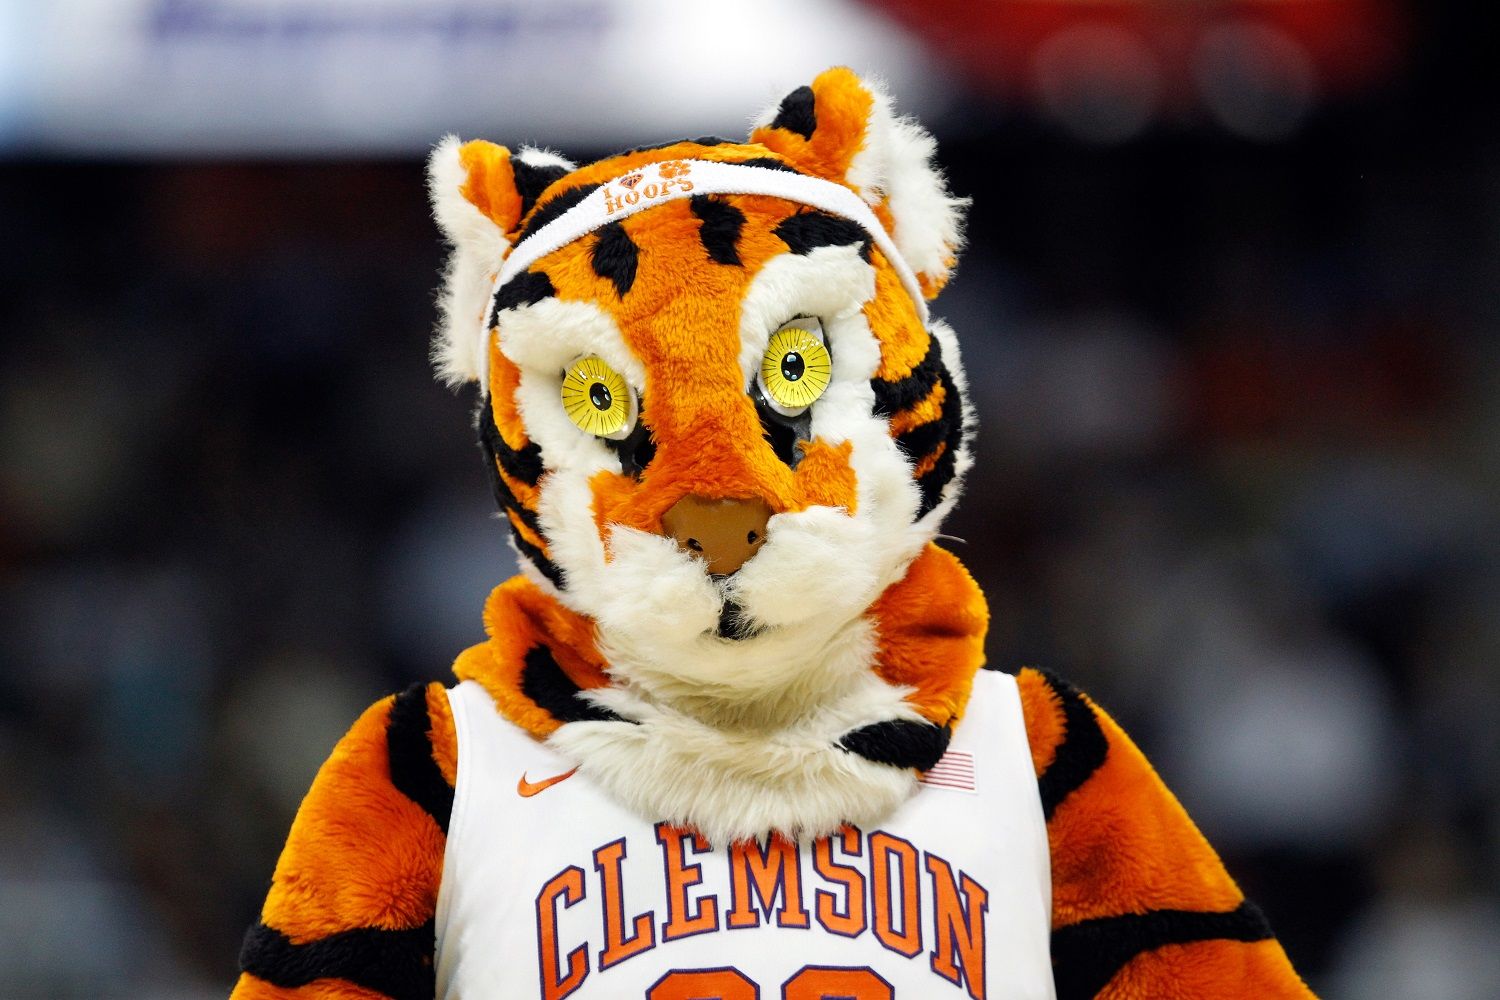 ATLANTA, GA - MARCH 08:  The mascot of the Clemson Tigers during their first round game of 2012 ACC Men's Basketball Conferene Tournament at Philips Arena on March 8, 2012 in Atlanta, Georgia.  (Photo by Streeter Lecka/Getty Images)